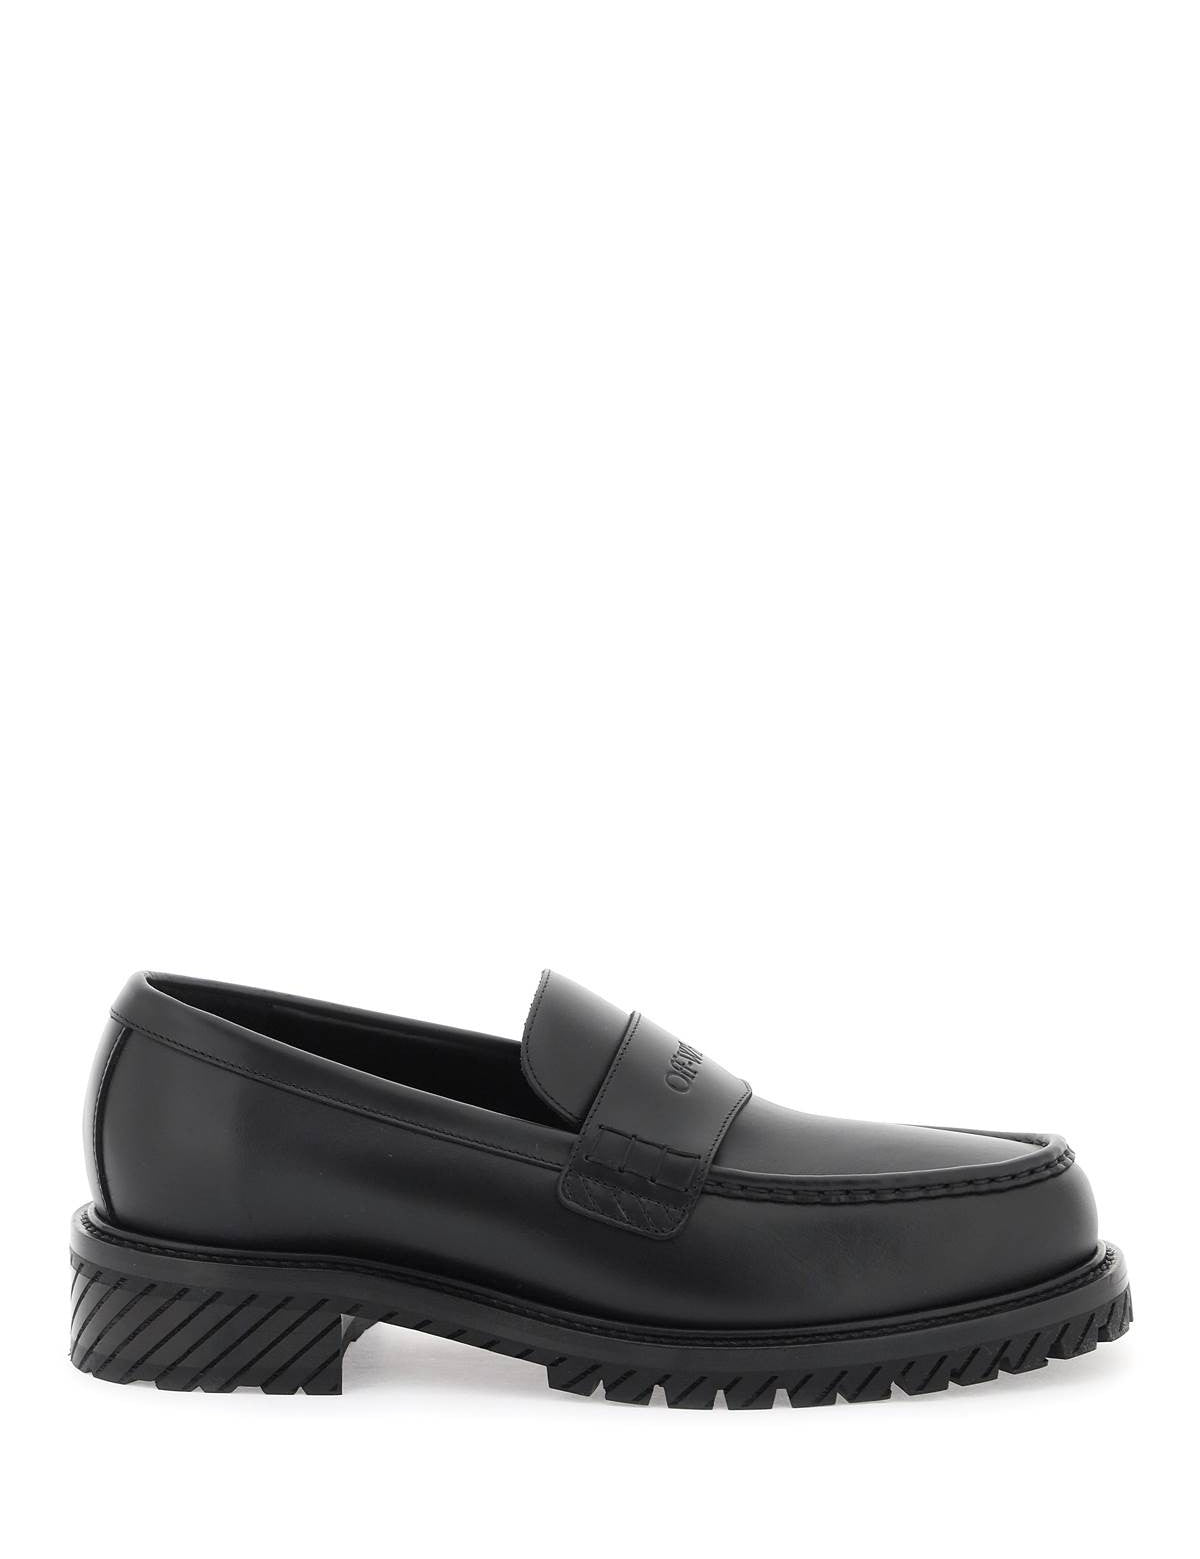 off-white-leather-loafers-for.jpg